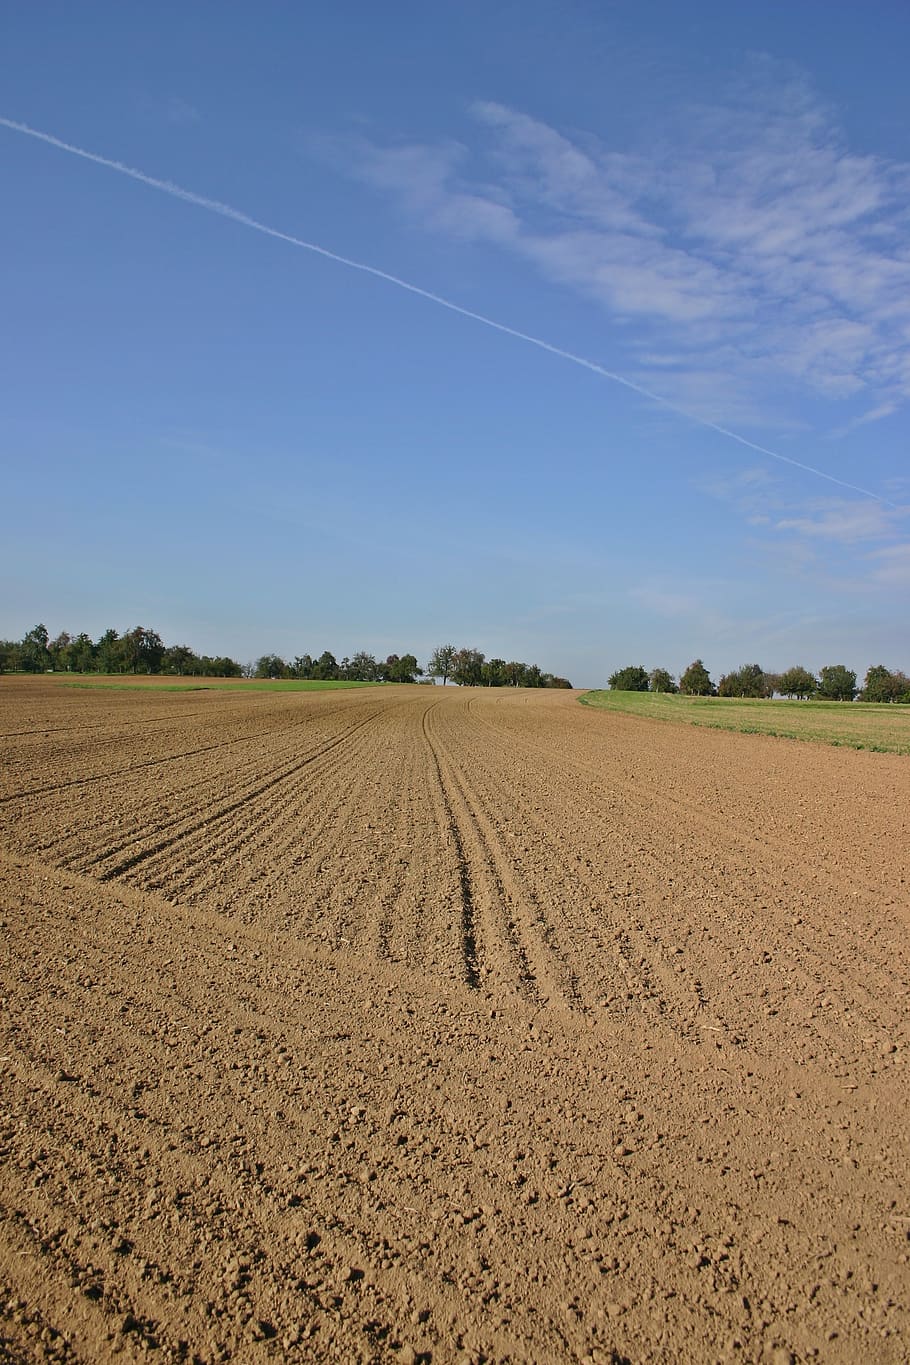 arable, ackerfurchen, field, agriculture, nature, symmetry, landscape, ground, earth, series